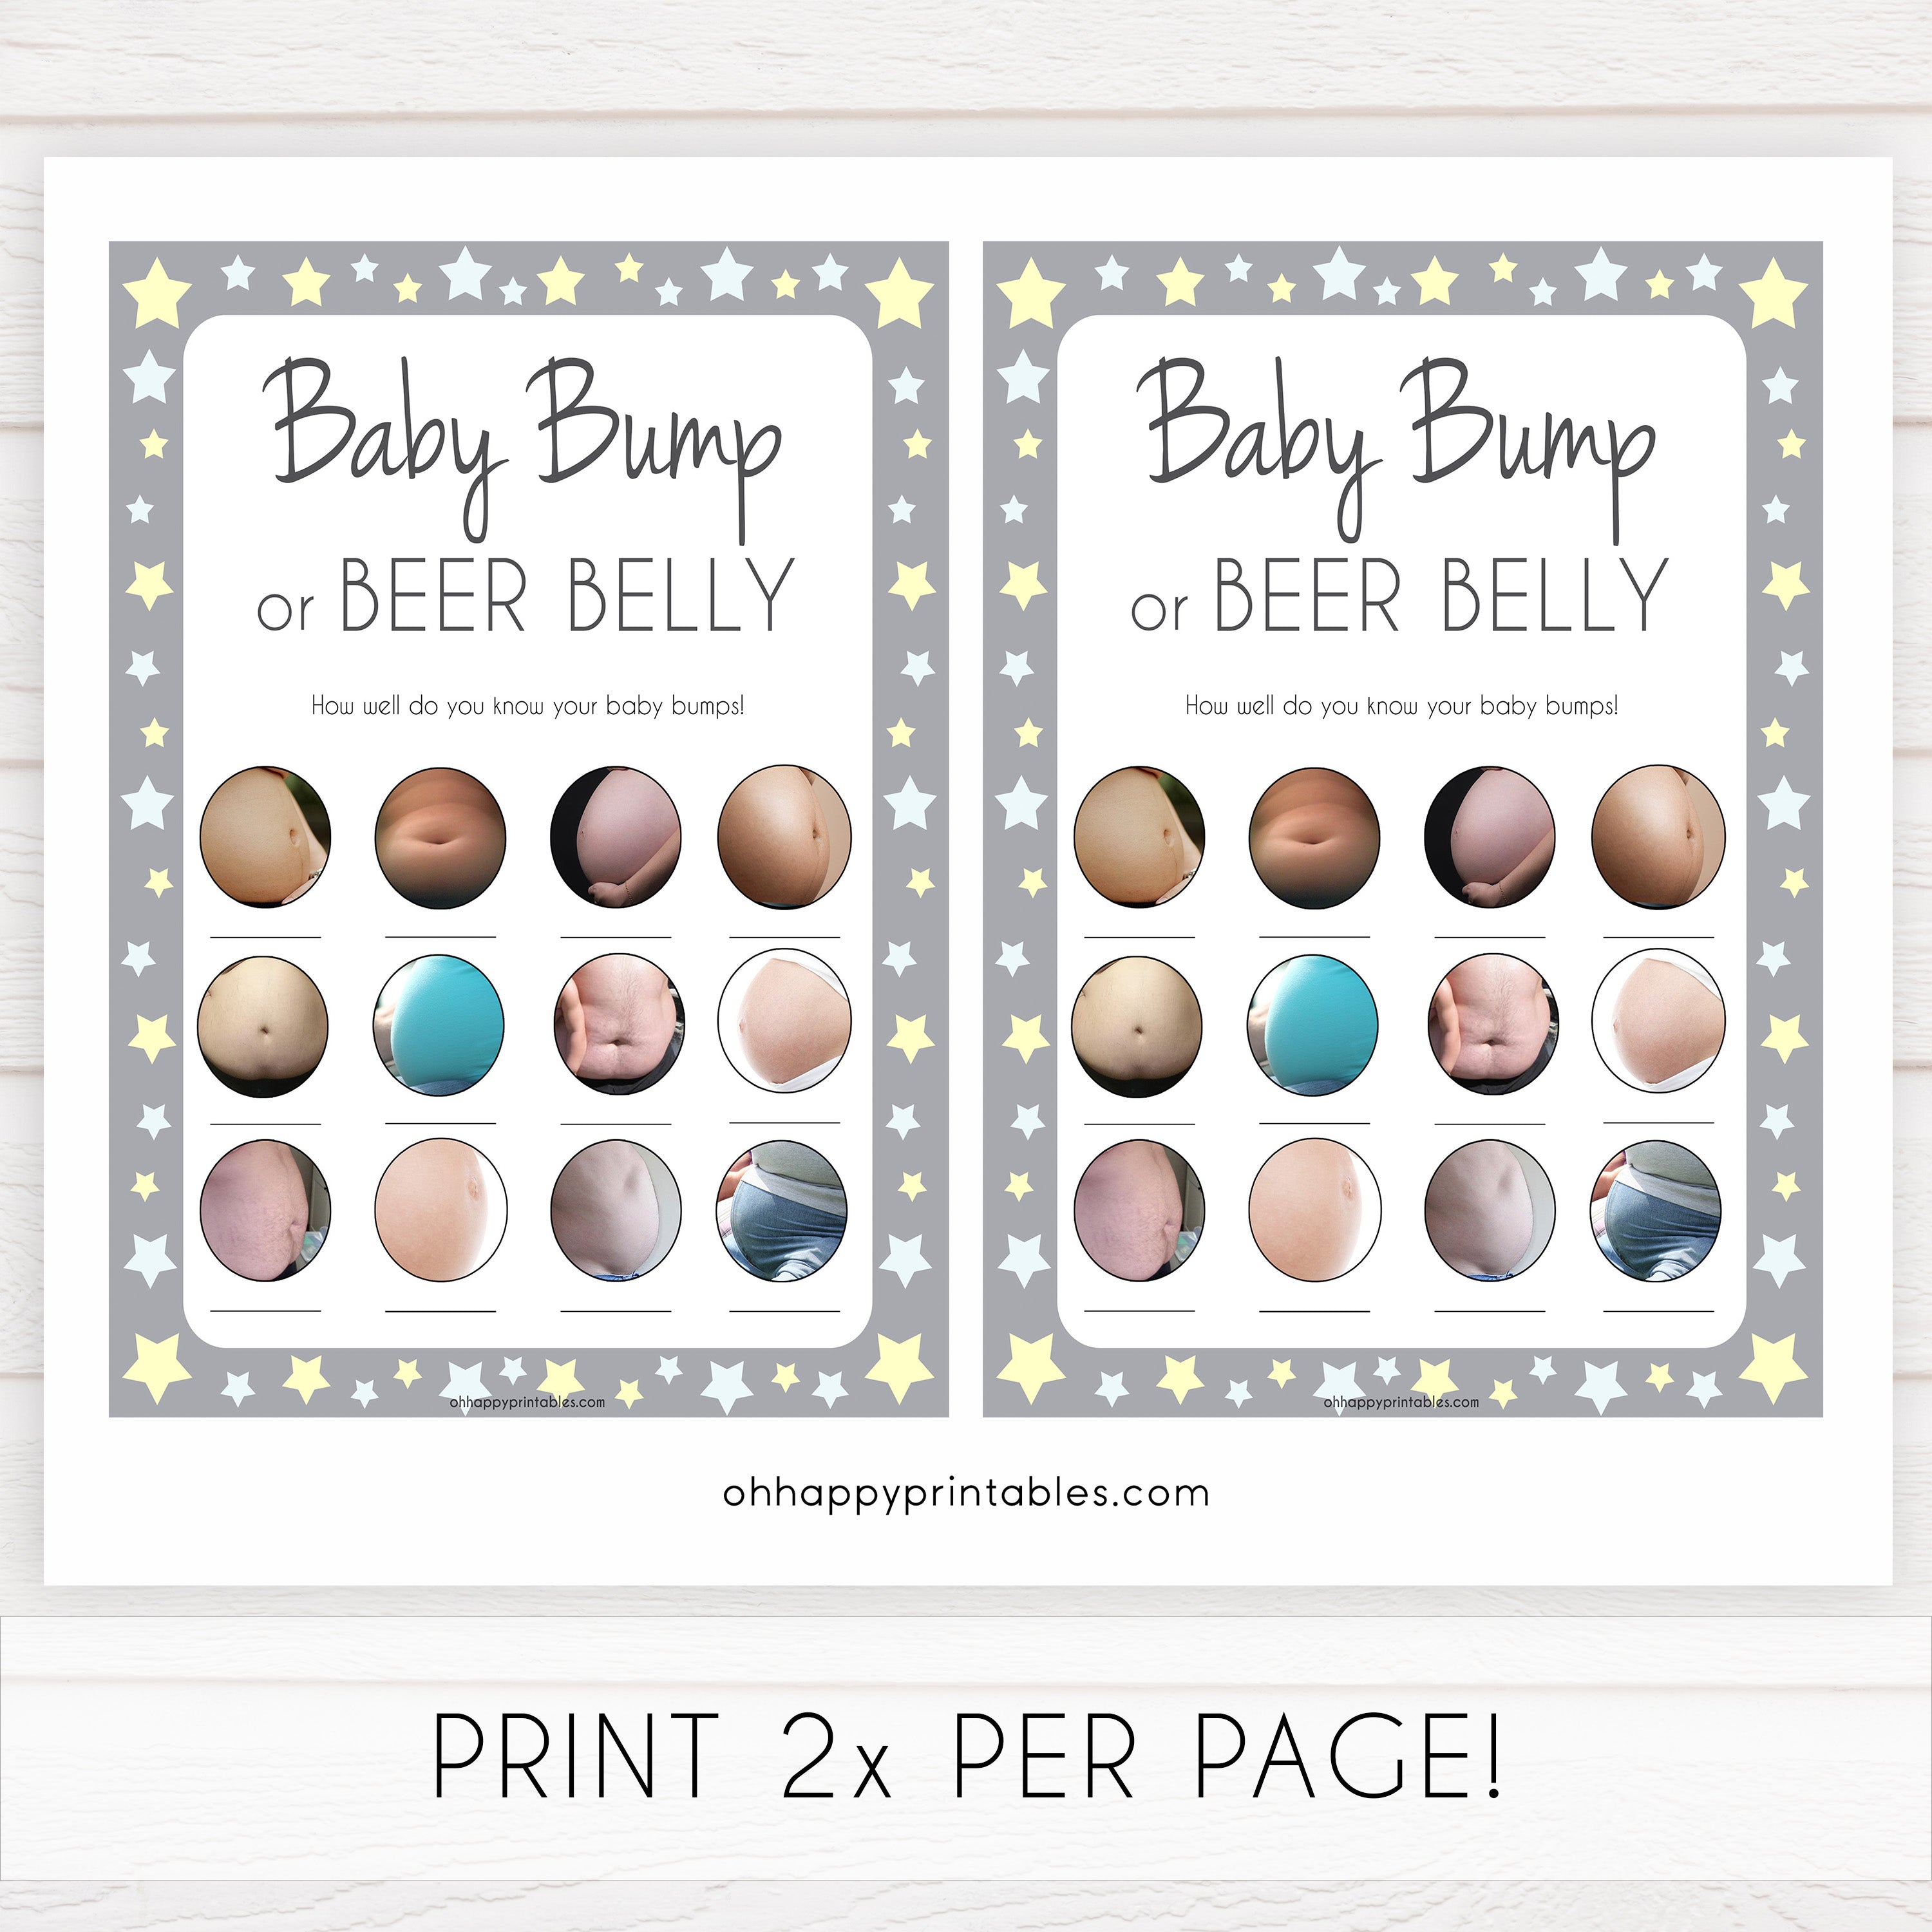 Baby Bump or Beer Belly, Baby Bump Beer Belly, Baby Shower Games, Baby Bump, Beer Belly, Pregnant or Beer Belly, Printable Baby Games, fun baby games, popular baby games